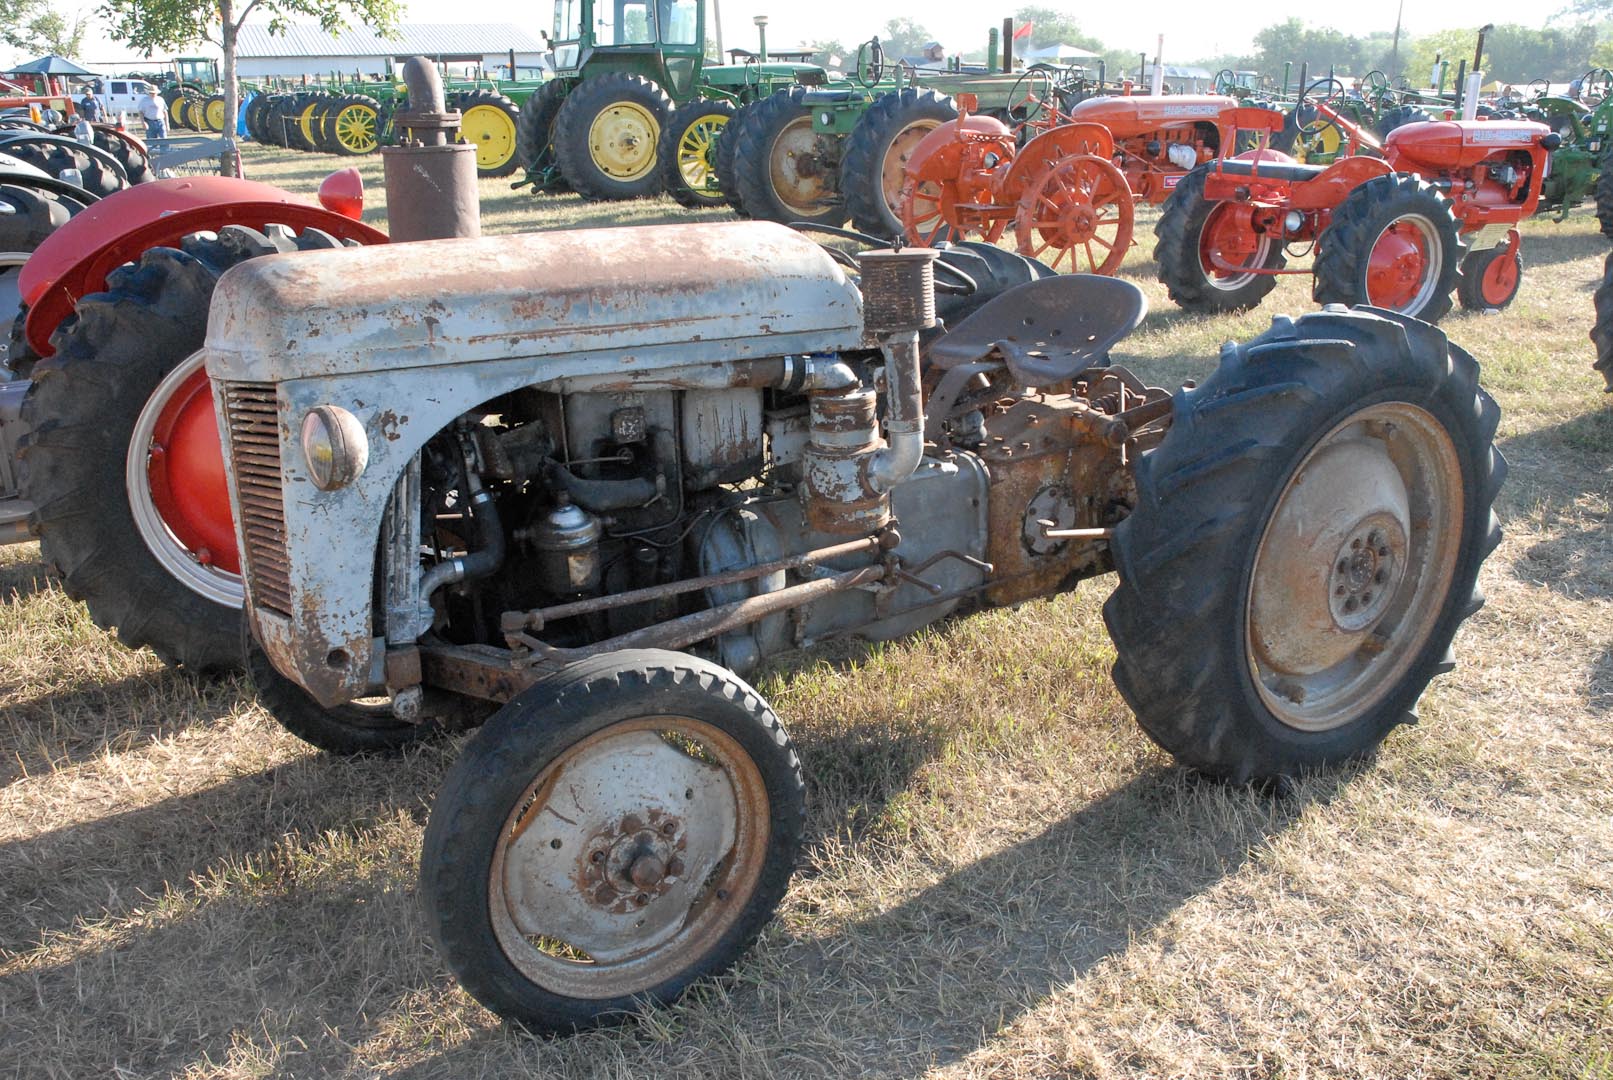 Mark Wendl of Edgar, Nebraska, brought this tractor that was purchased in France. It contains a one-cylinder two-cycle diesel CLM engine. The one cylinder has two opposing pistons in it which simultaneously compress the fuel-air mixture.